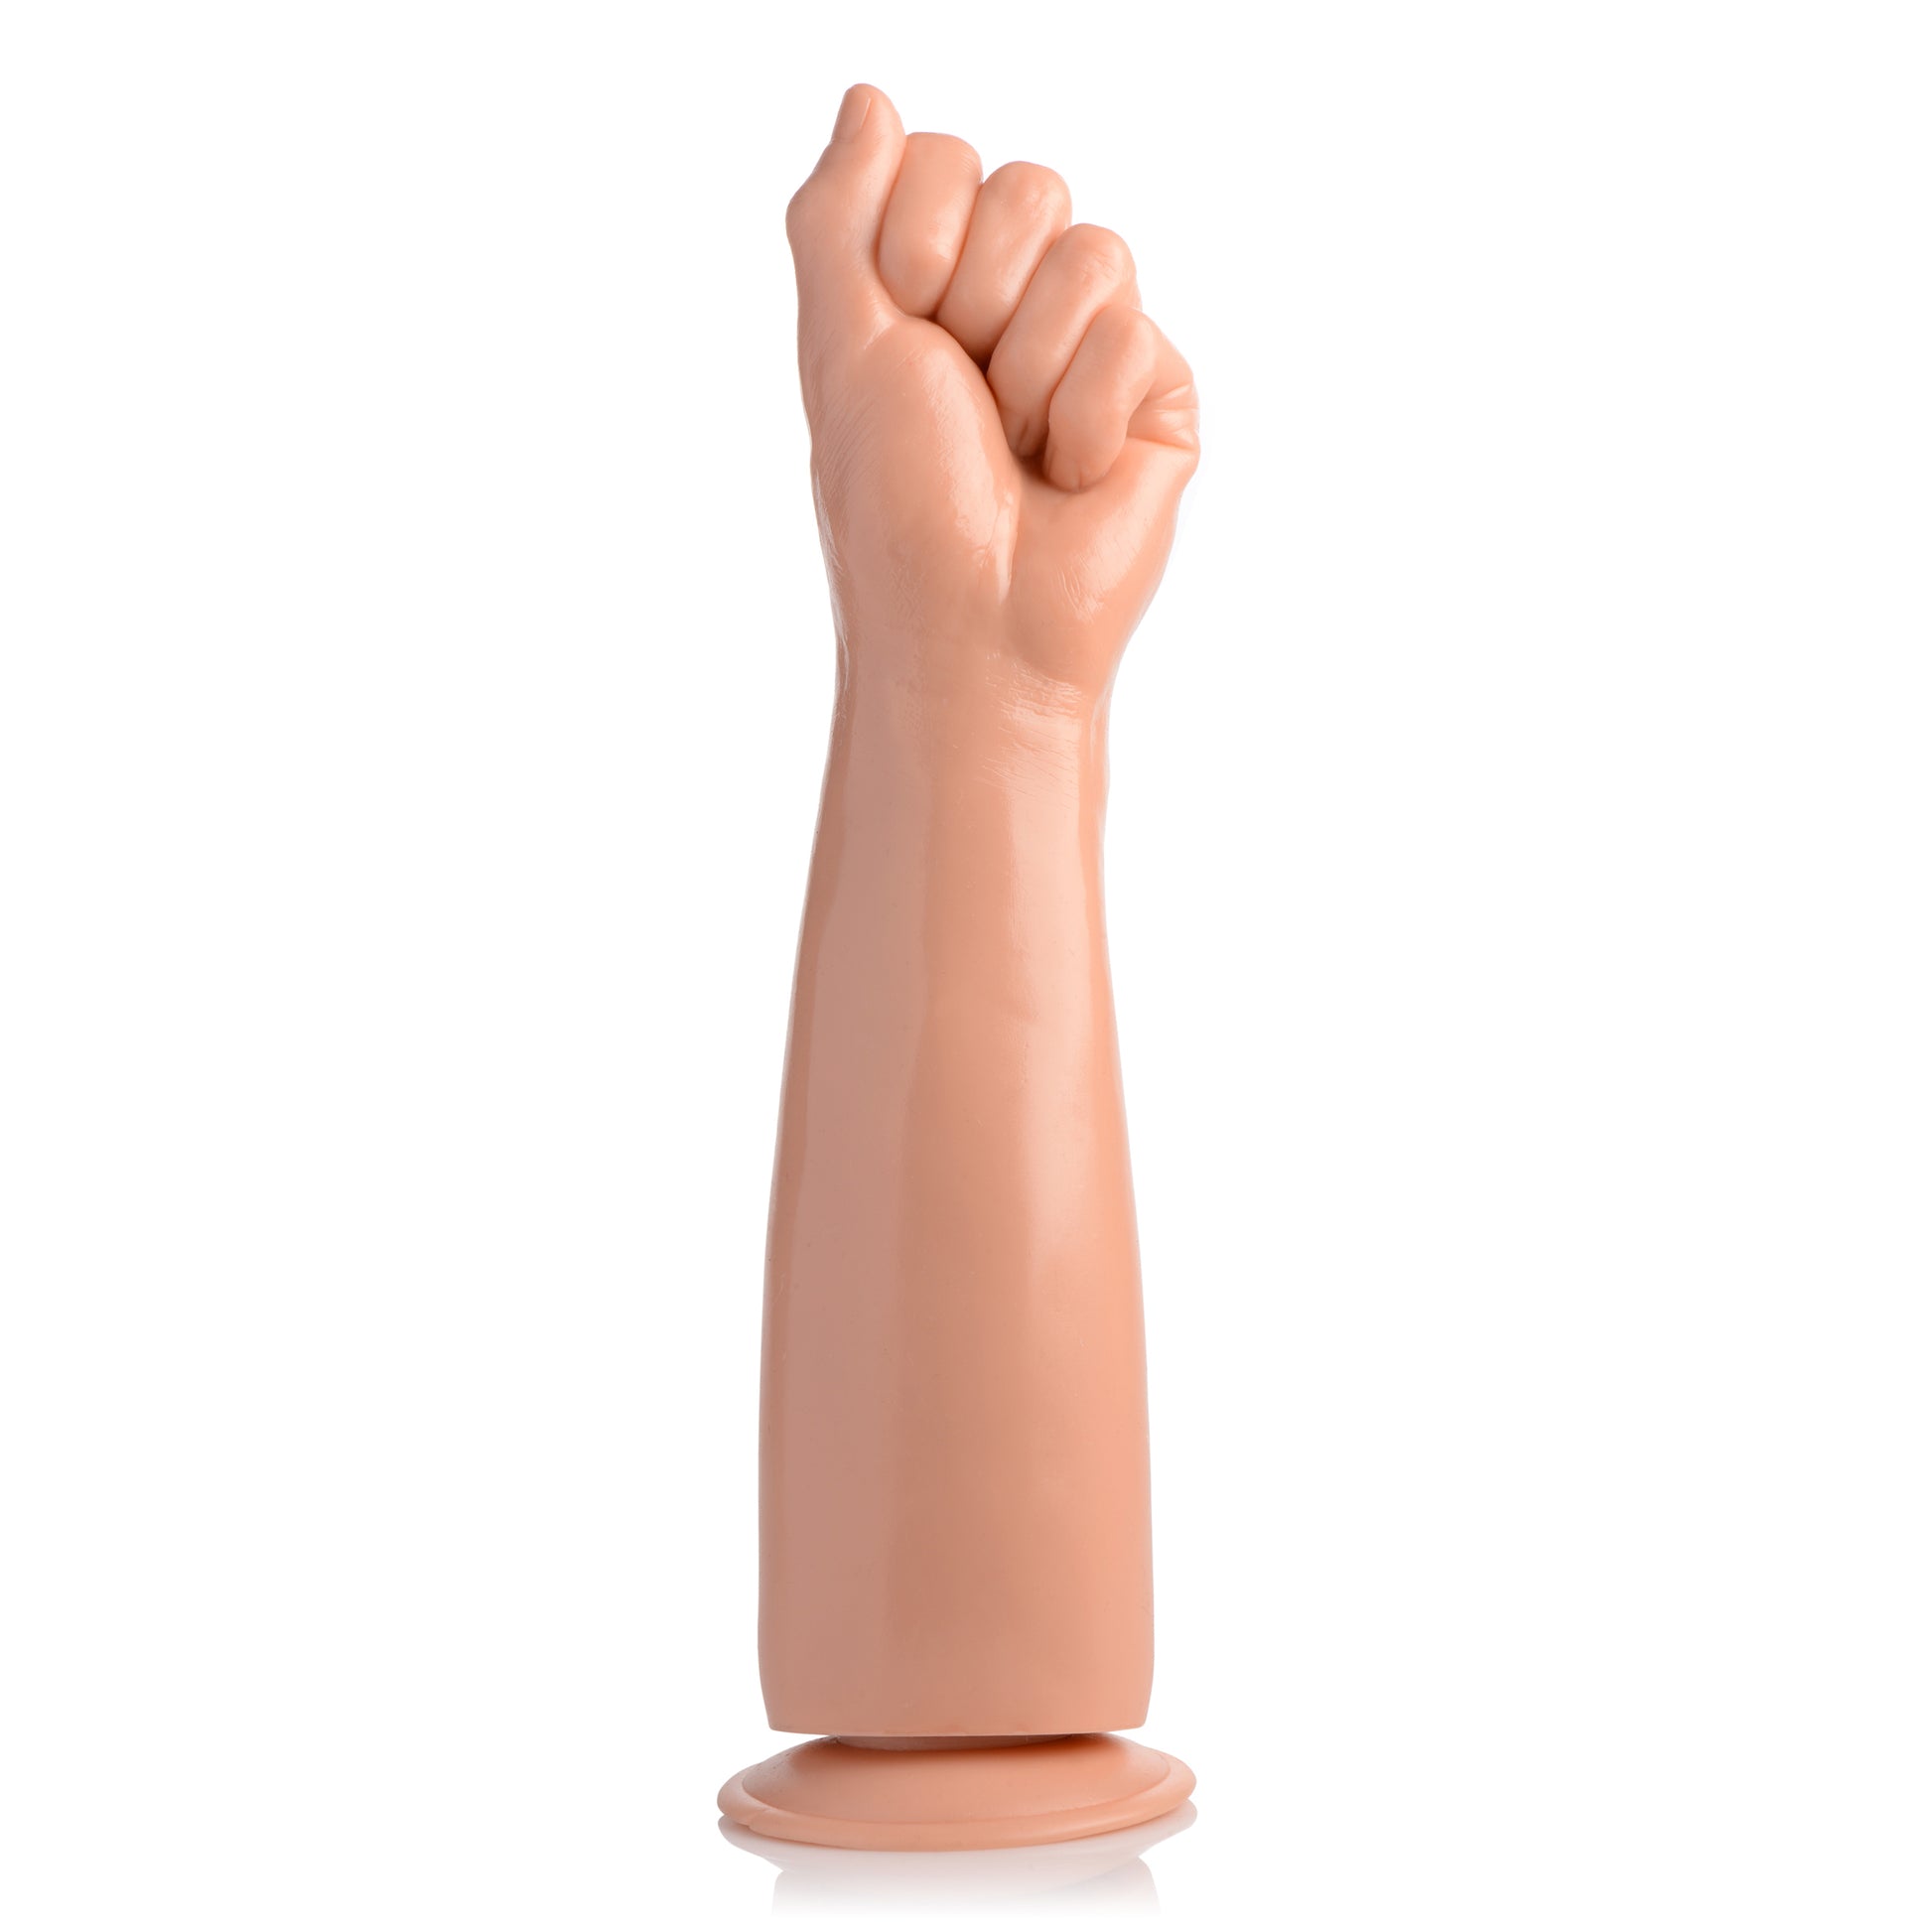 Fisto Clenched Fist Dildo - UABDSM